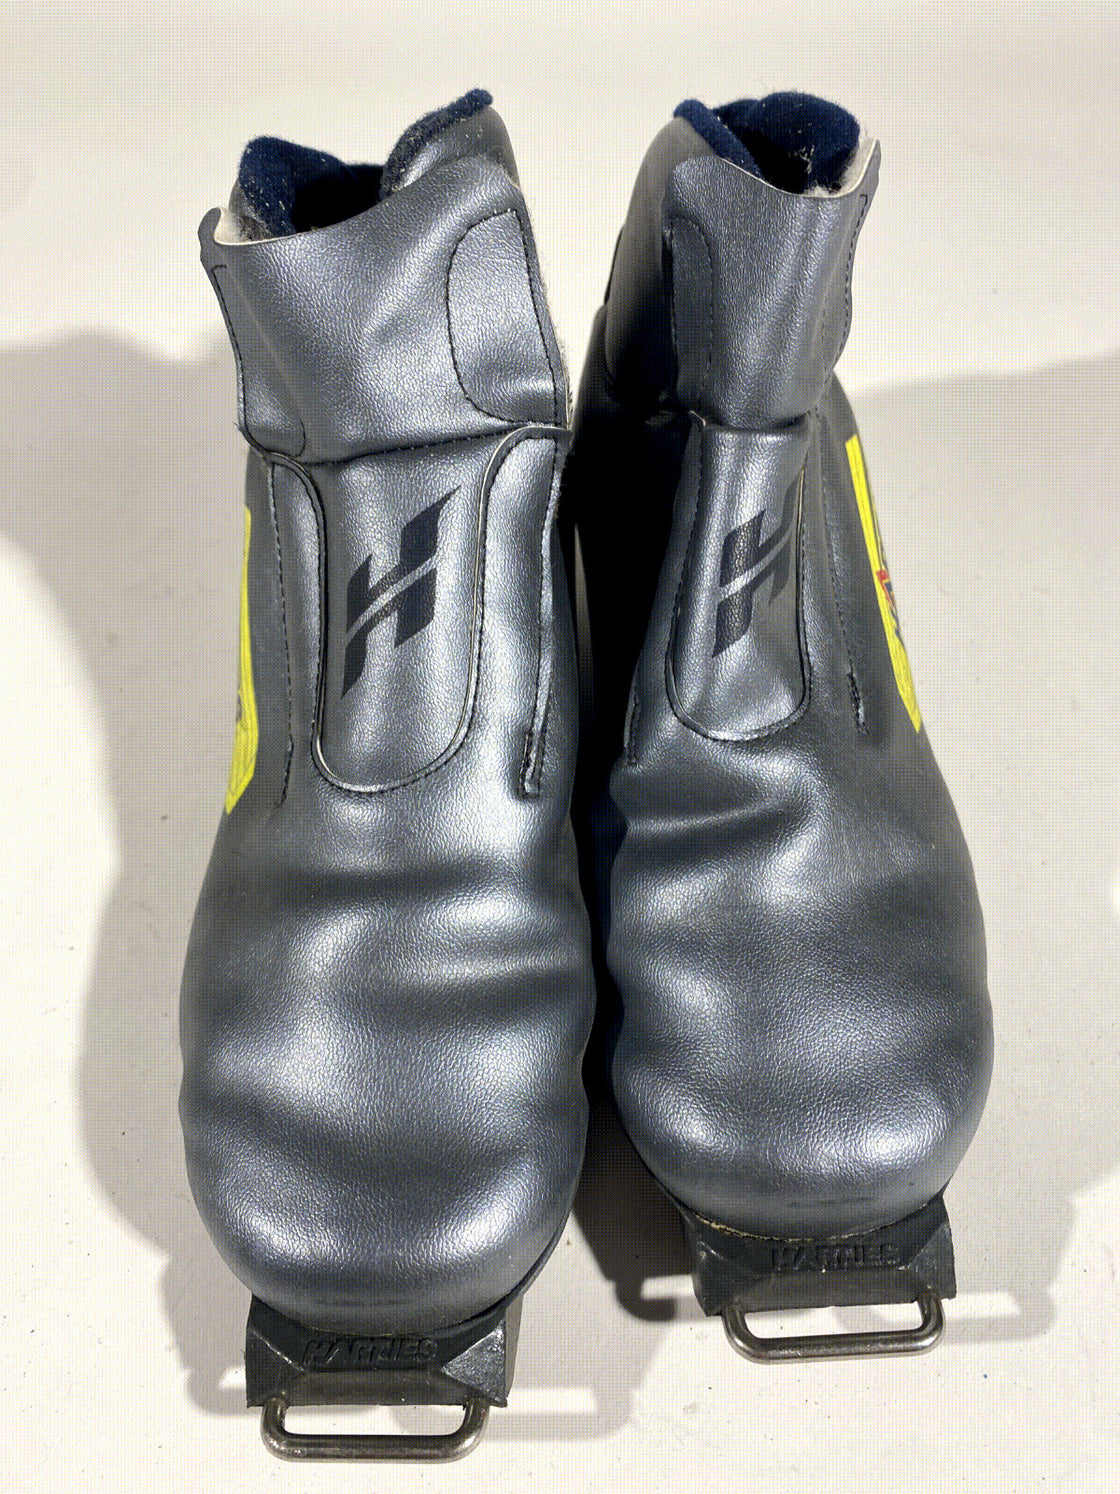 Hartjes Vintage Nordic Cross Country Ski Boots Size EU36 US4.5 for SNS Old